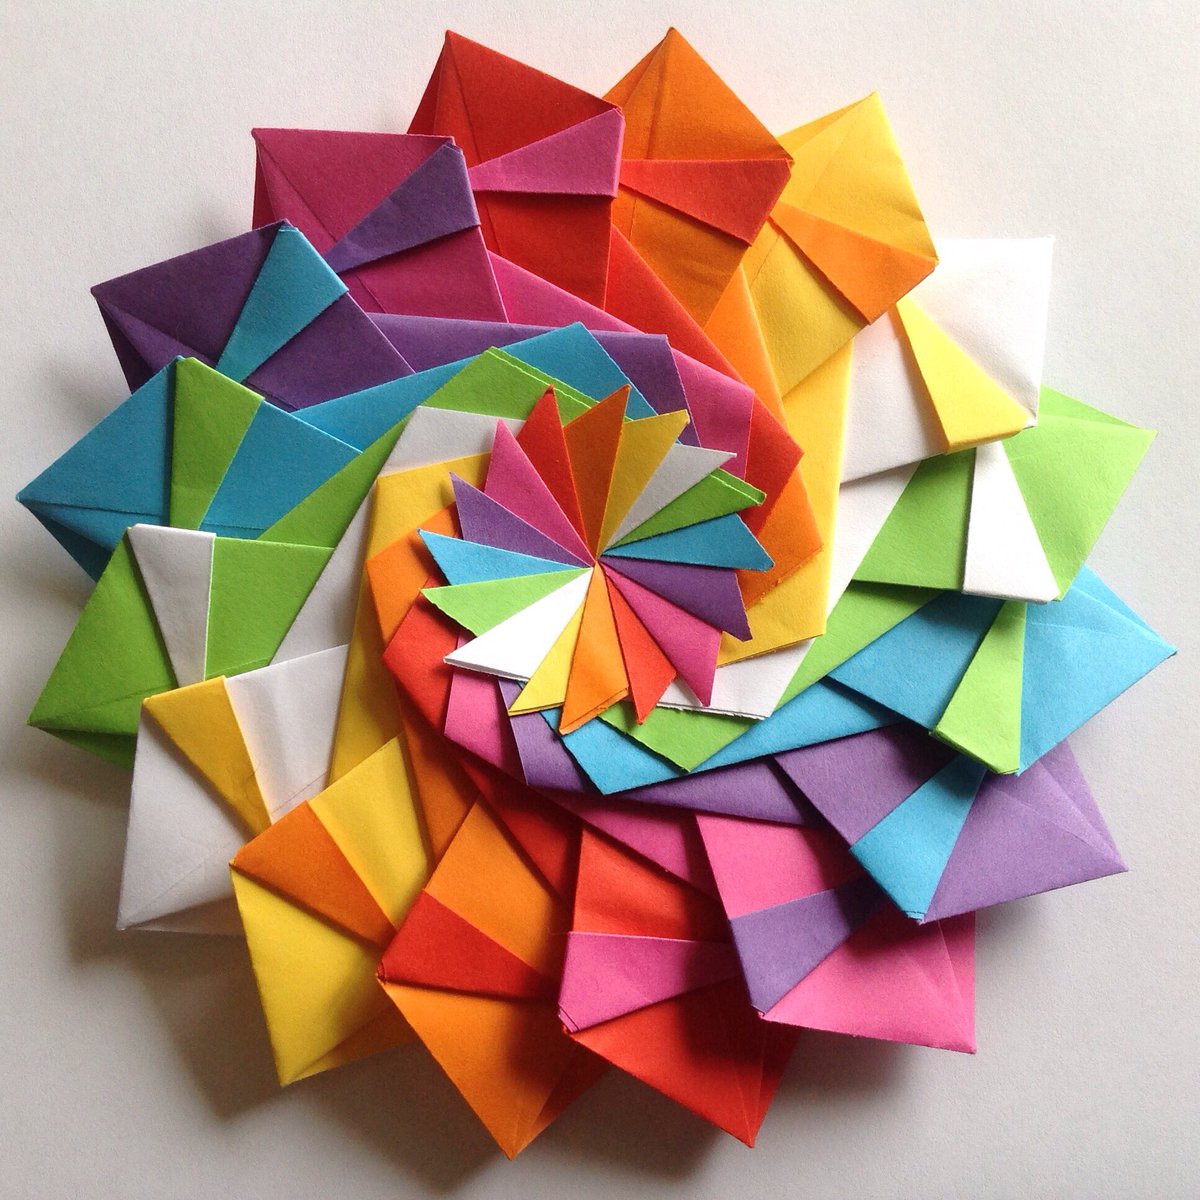 14) And the last one, for now at least: another modular  #origami fold, and one of my favourites - Star Festival by Nobuko Okabe Diagrams here:  https://origamiusa.org/thefold/article/diagram-star-festival or  @happyfolding video here:  #3DMaths  #HandsOnMaths  #LockdownMaths  #ArtfulMaths